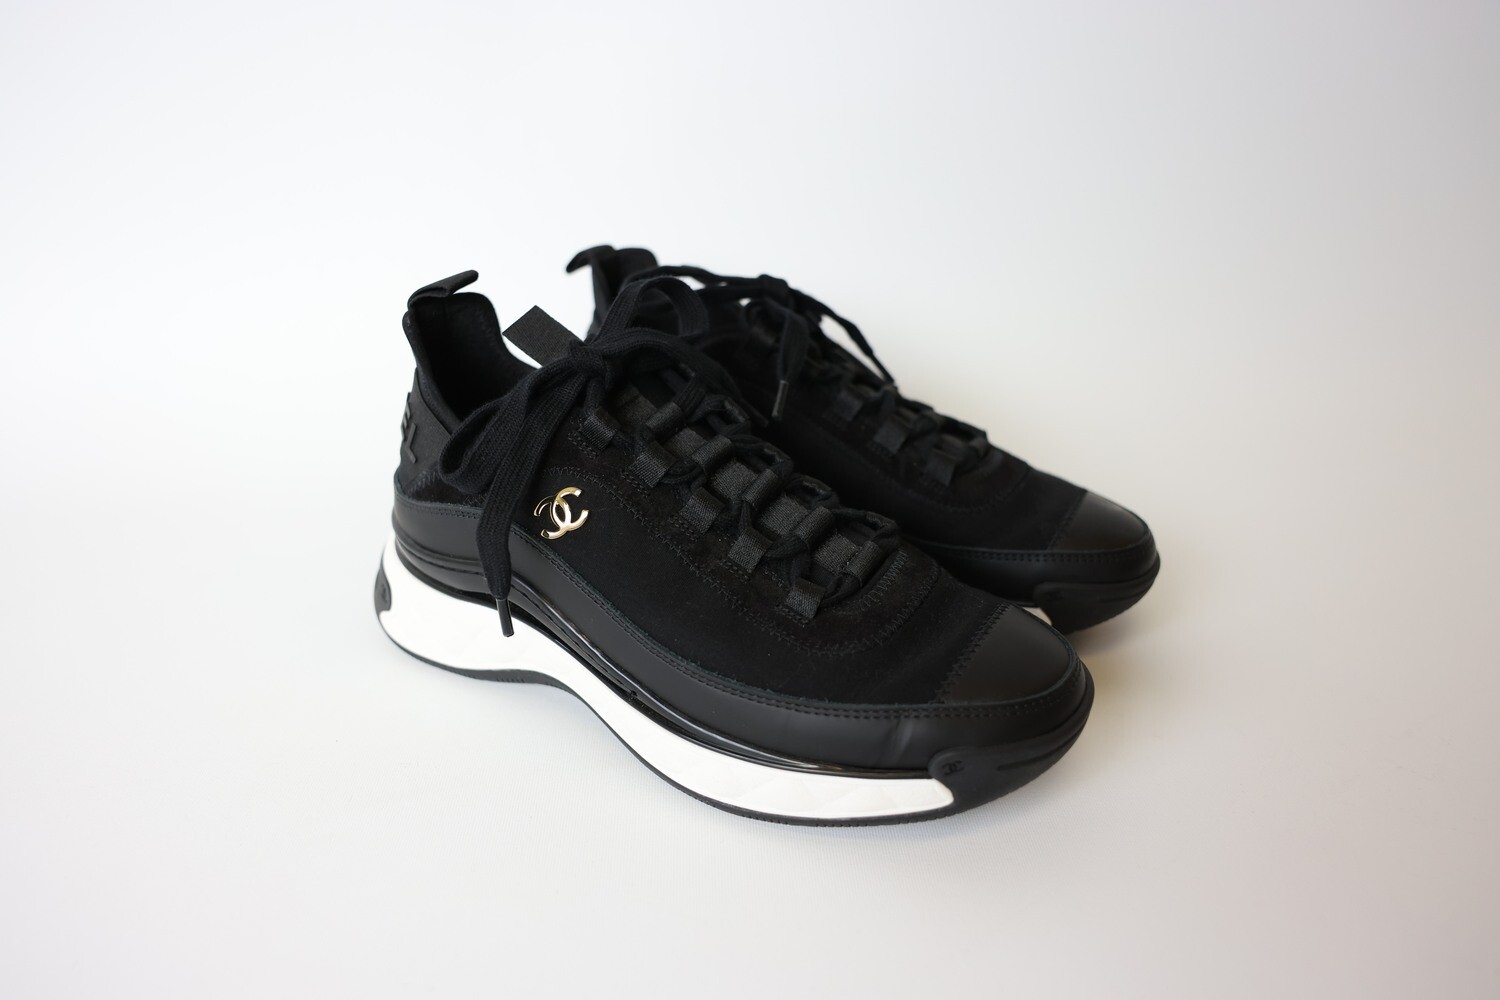 Chanel Sneakers, White with Black, Size 38, New in Box WA001